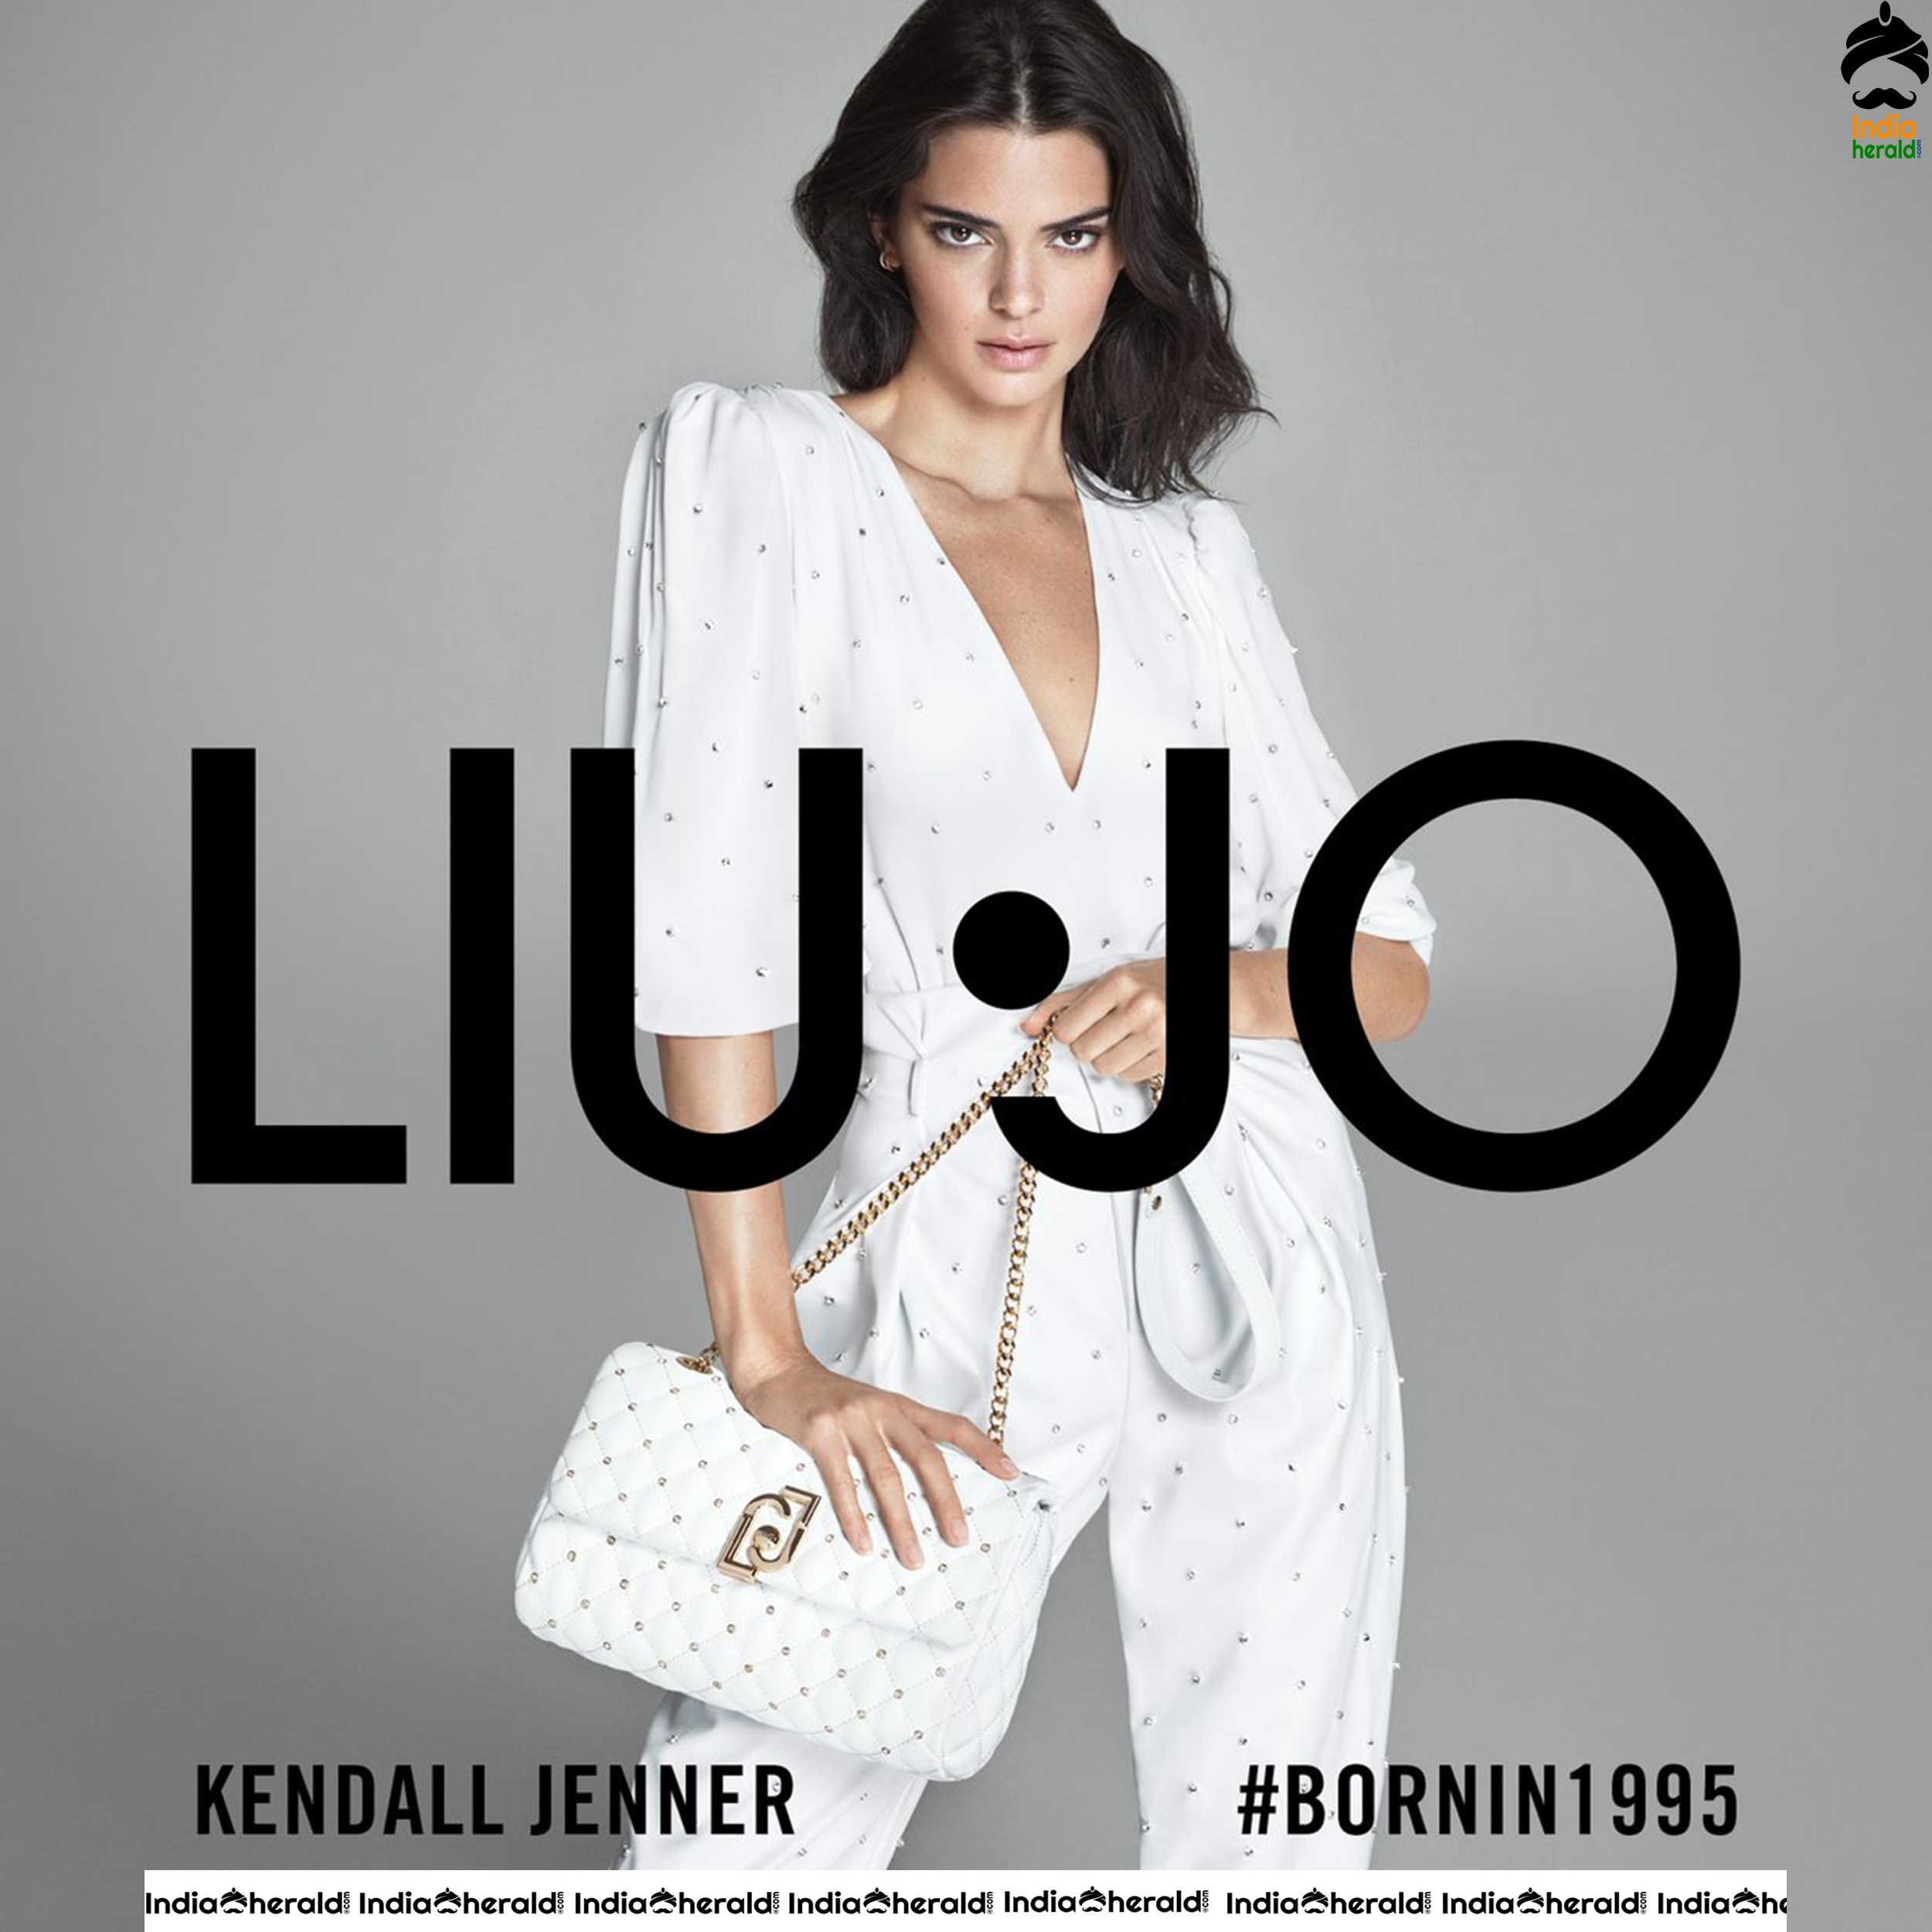 Kendall Jenner Liu Jo Hot Photoshoot for Born in 1995 Campaign